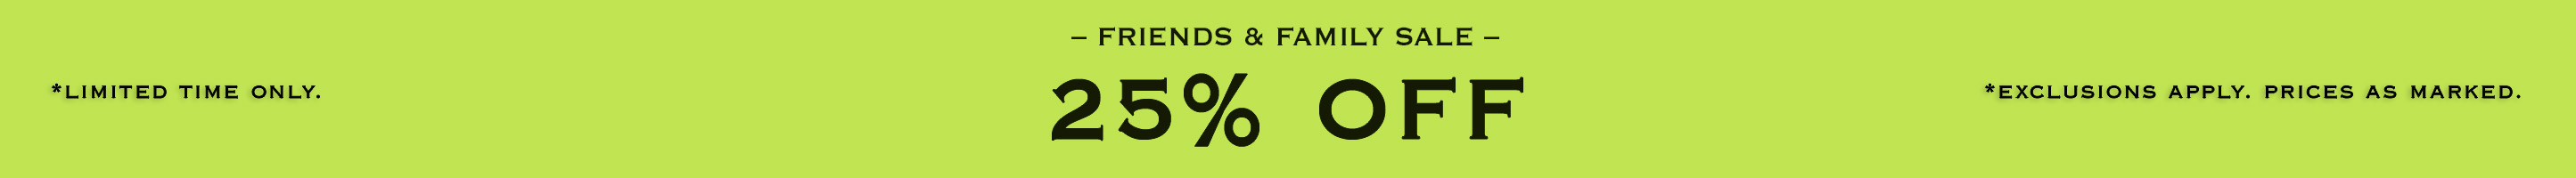 friends & family sale. 25% off